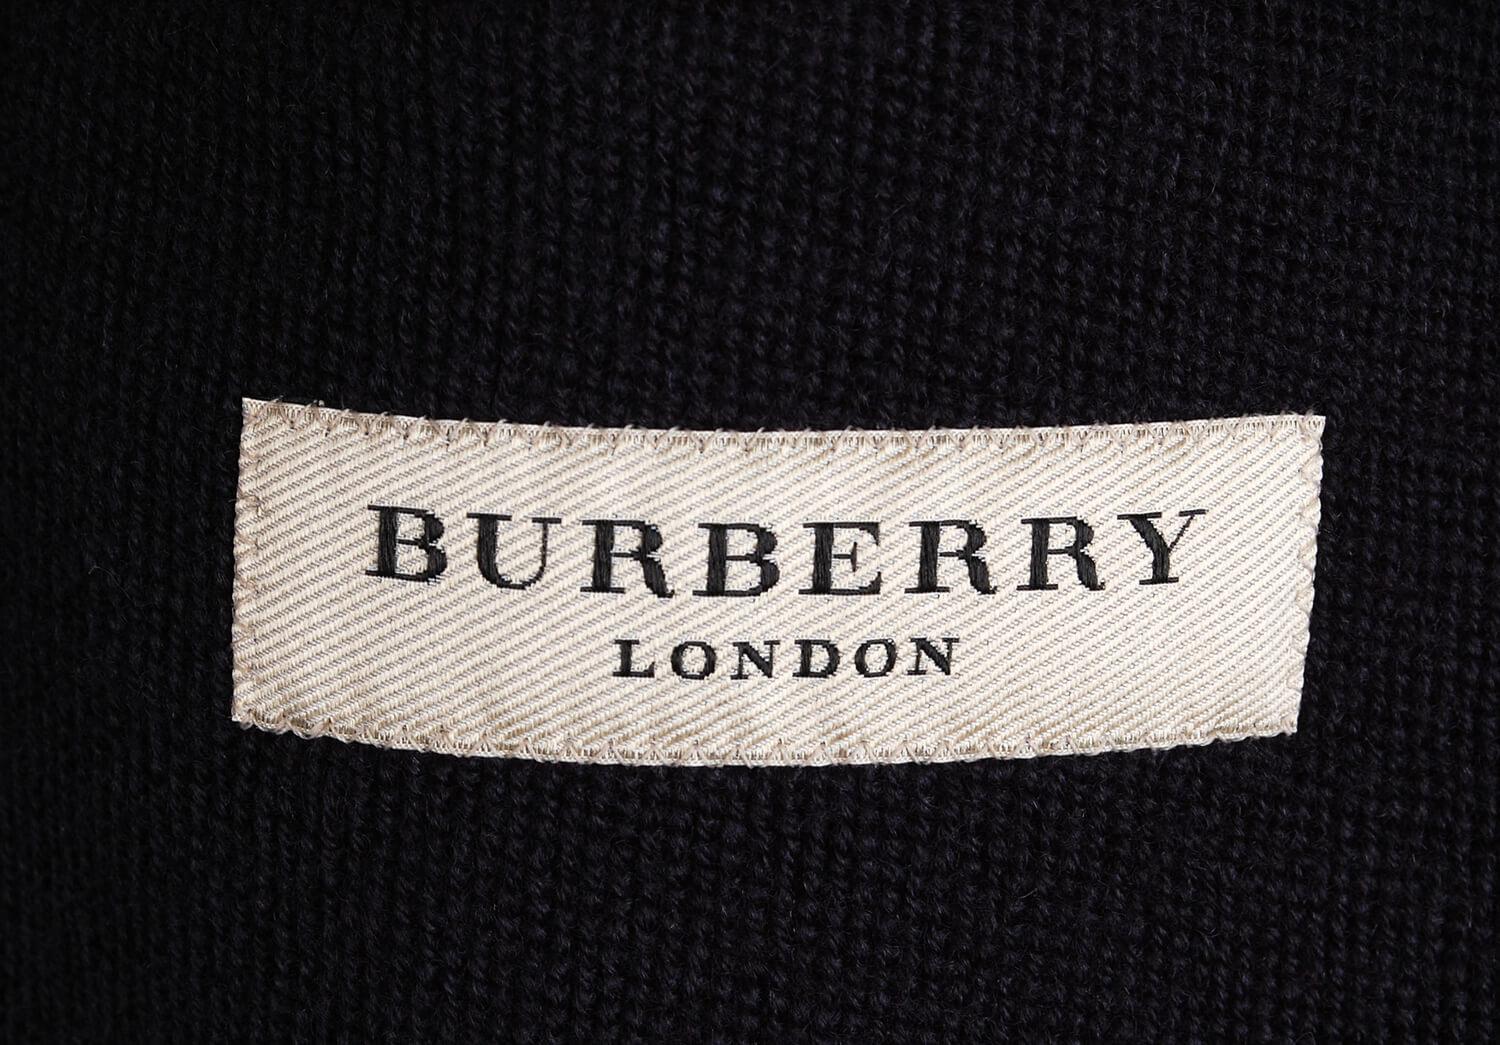 Burberry London Blazer Wool Men Samford Jacket Size 50R (M) In Excellent Condition For Sale In Kaunas, LT